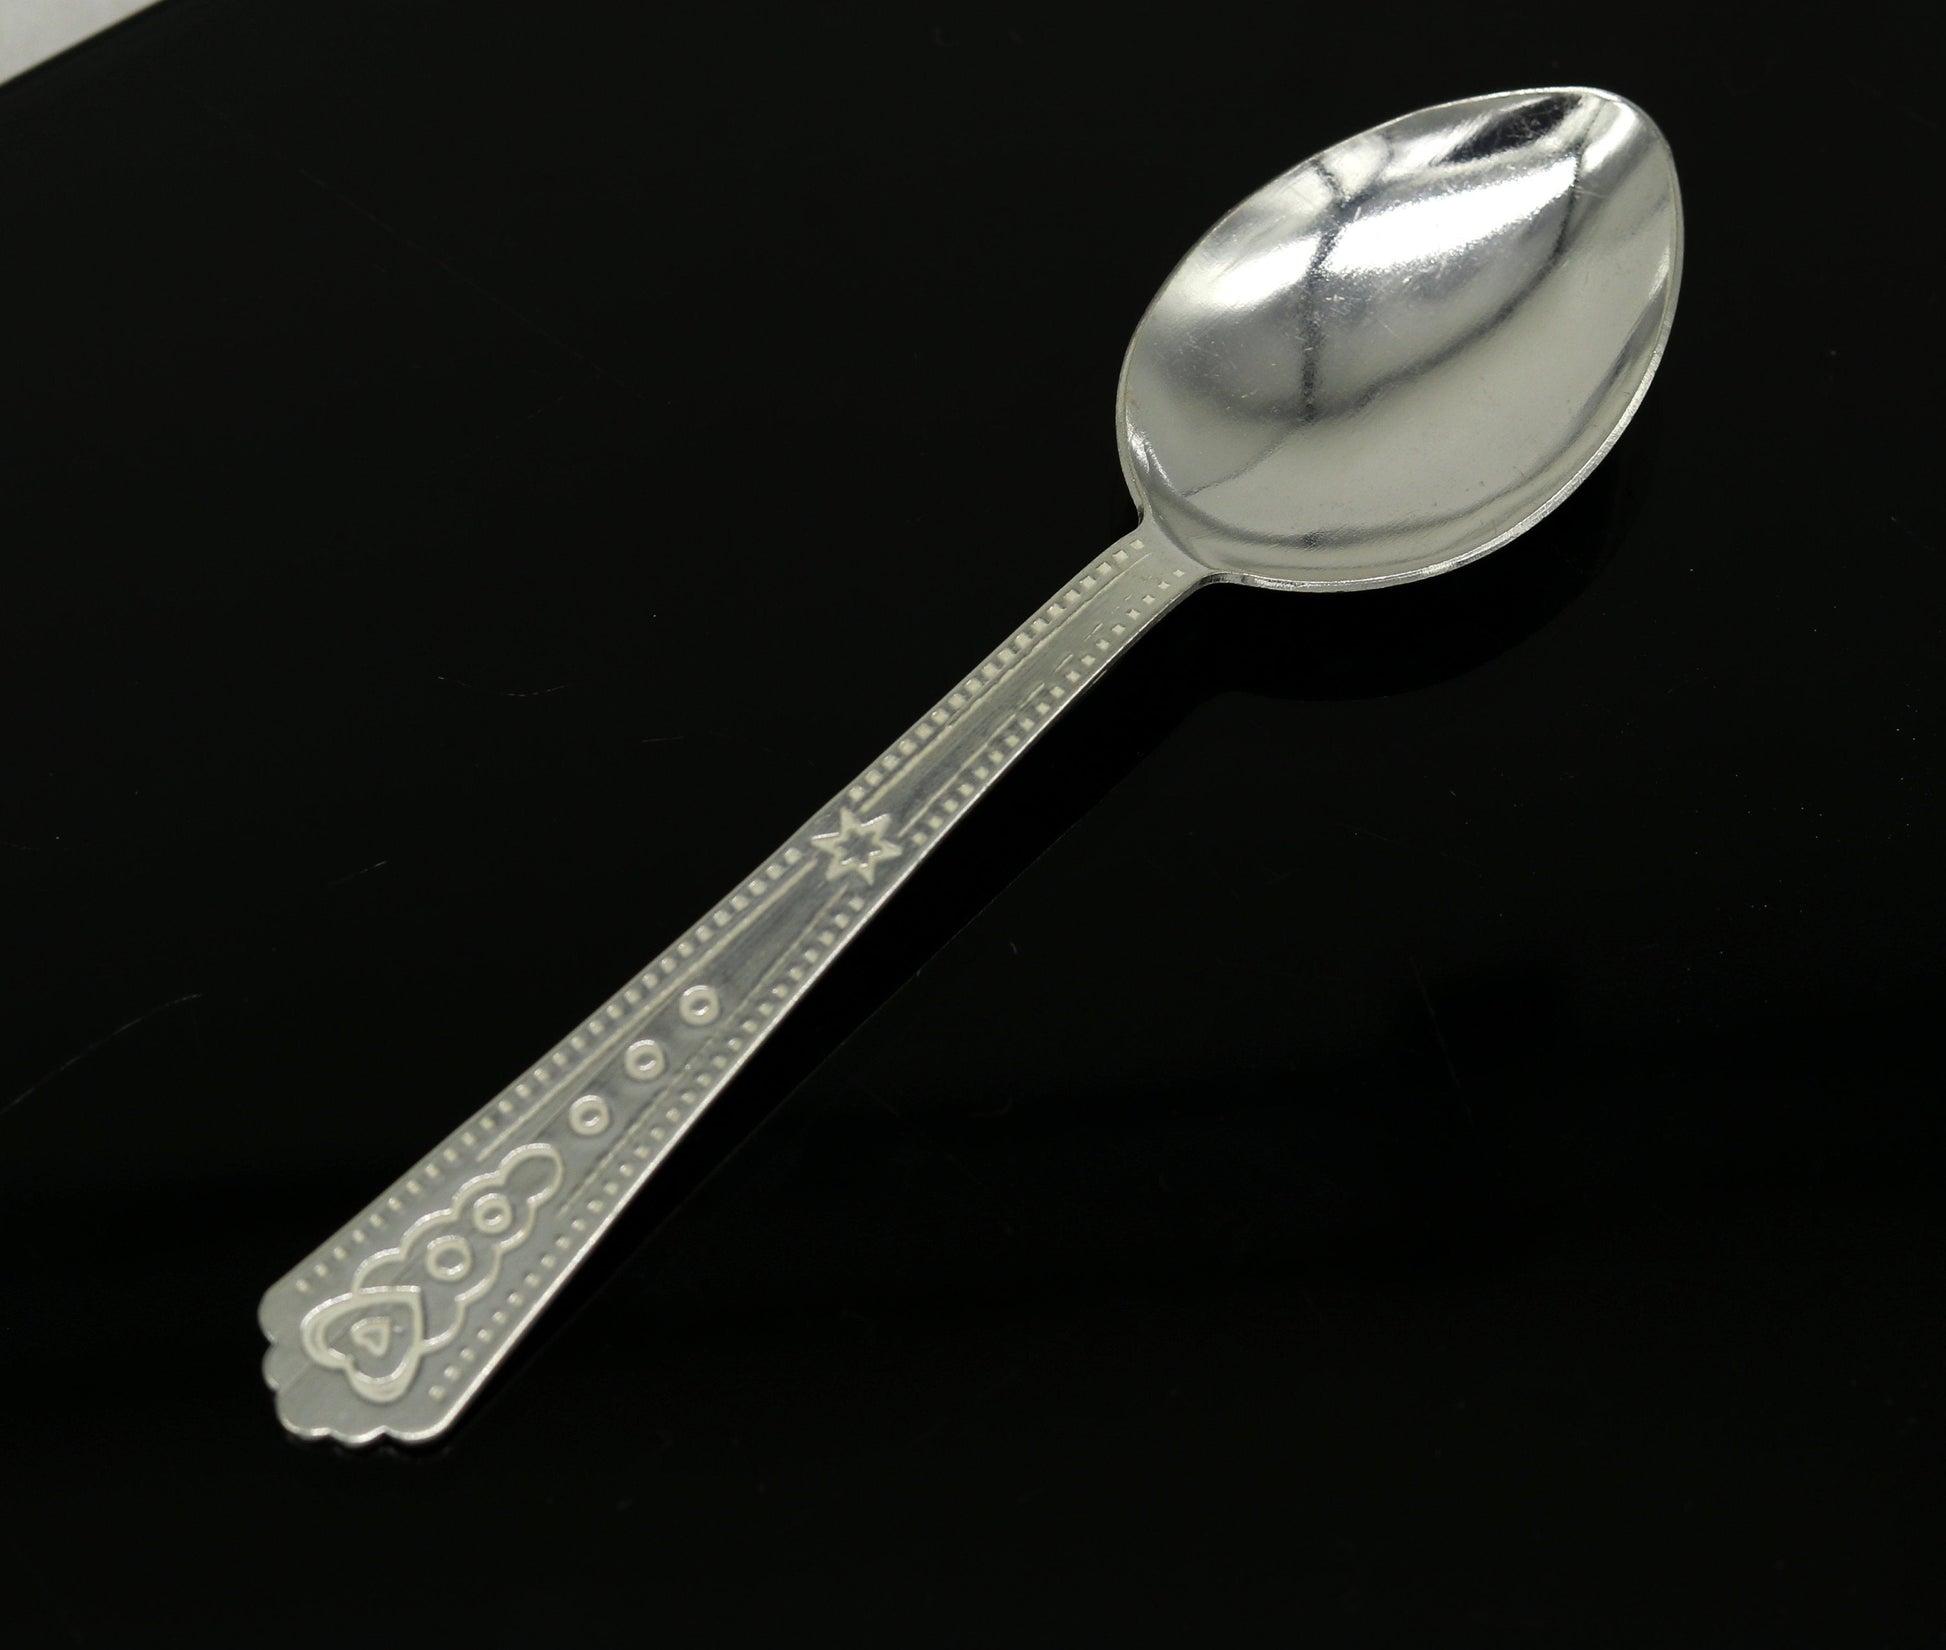 Pure sterling silver handmade solid silver spoon kitchen utensils, vessels, silver has antibacterial properties, keep stay healthy sv57 - TRIBAL ORNAMENTS